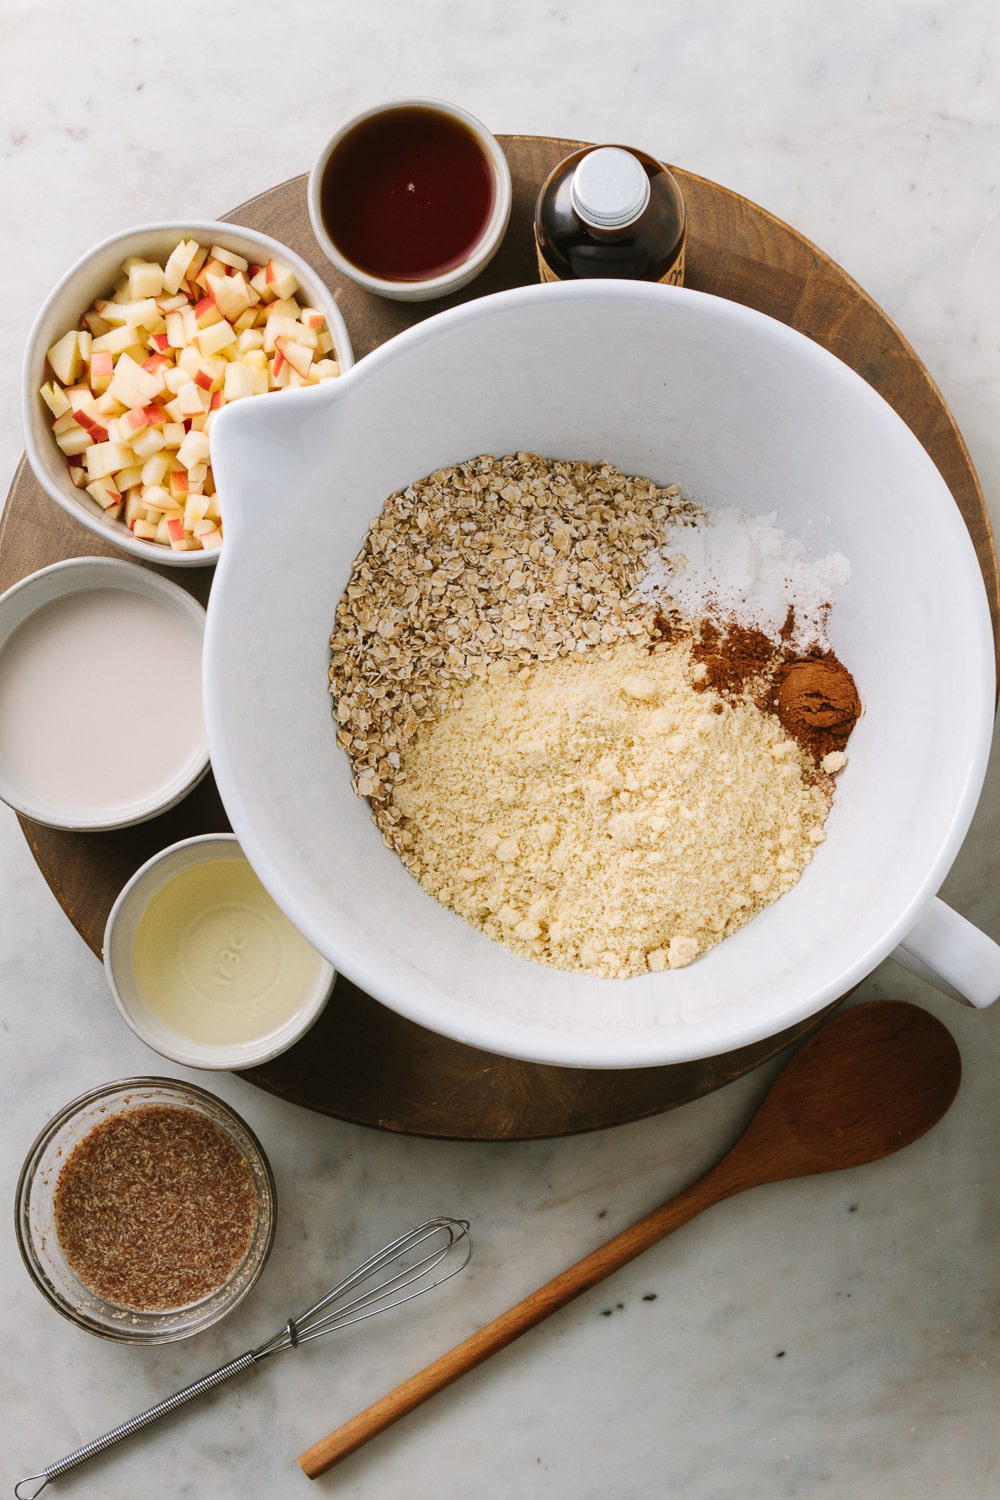 top down view of a mixing bowl filled with almond flour, oats, baking powder, salt and cinnamon, surrounded by small bowls filled with finely diced apples, plant milk, pure maple syrup, oil, flax egg, and bottle of vanilla on a circular brown wooden cutting board